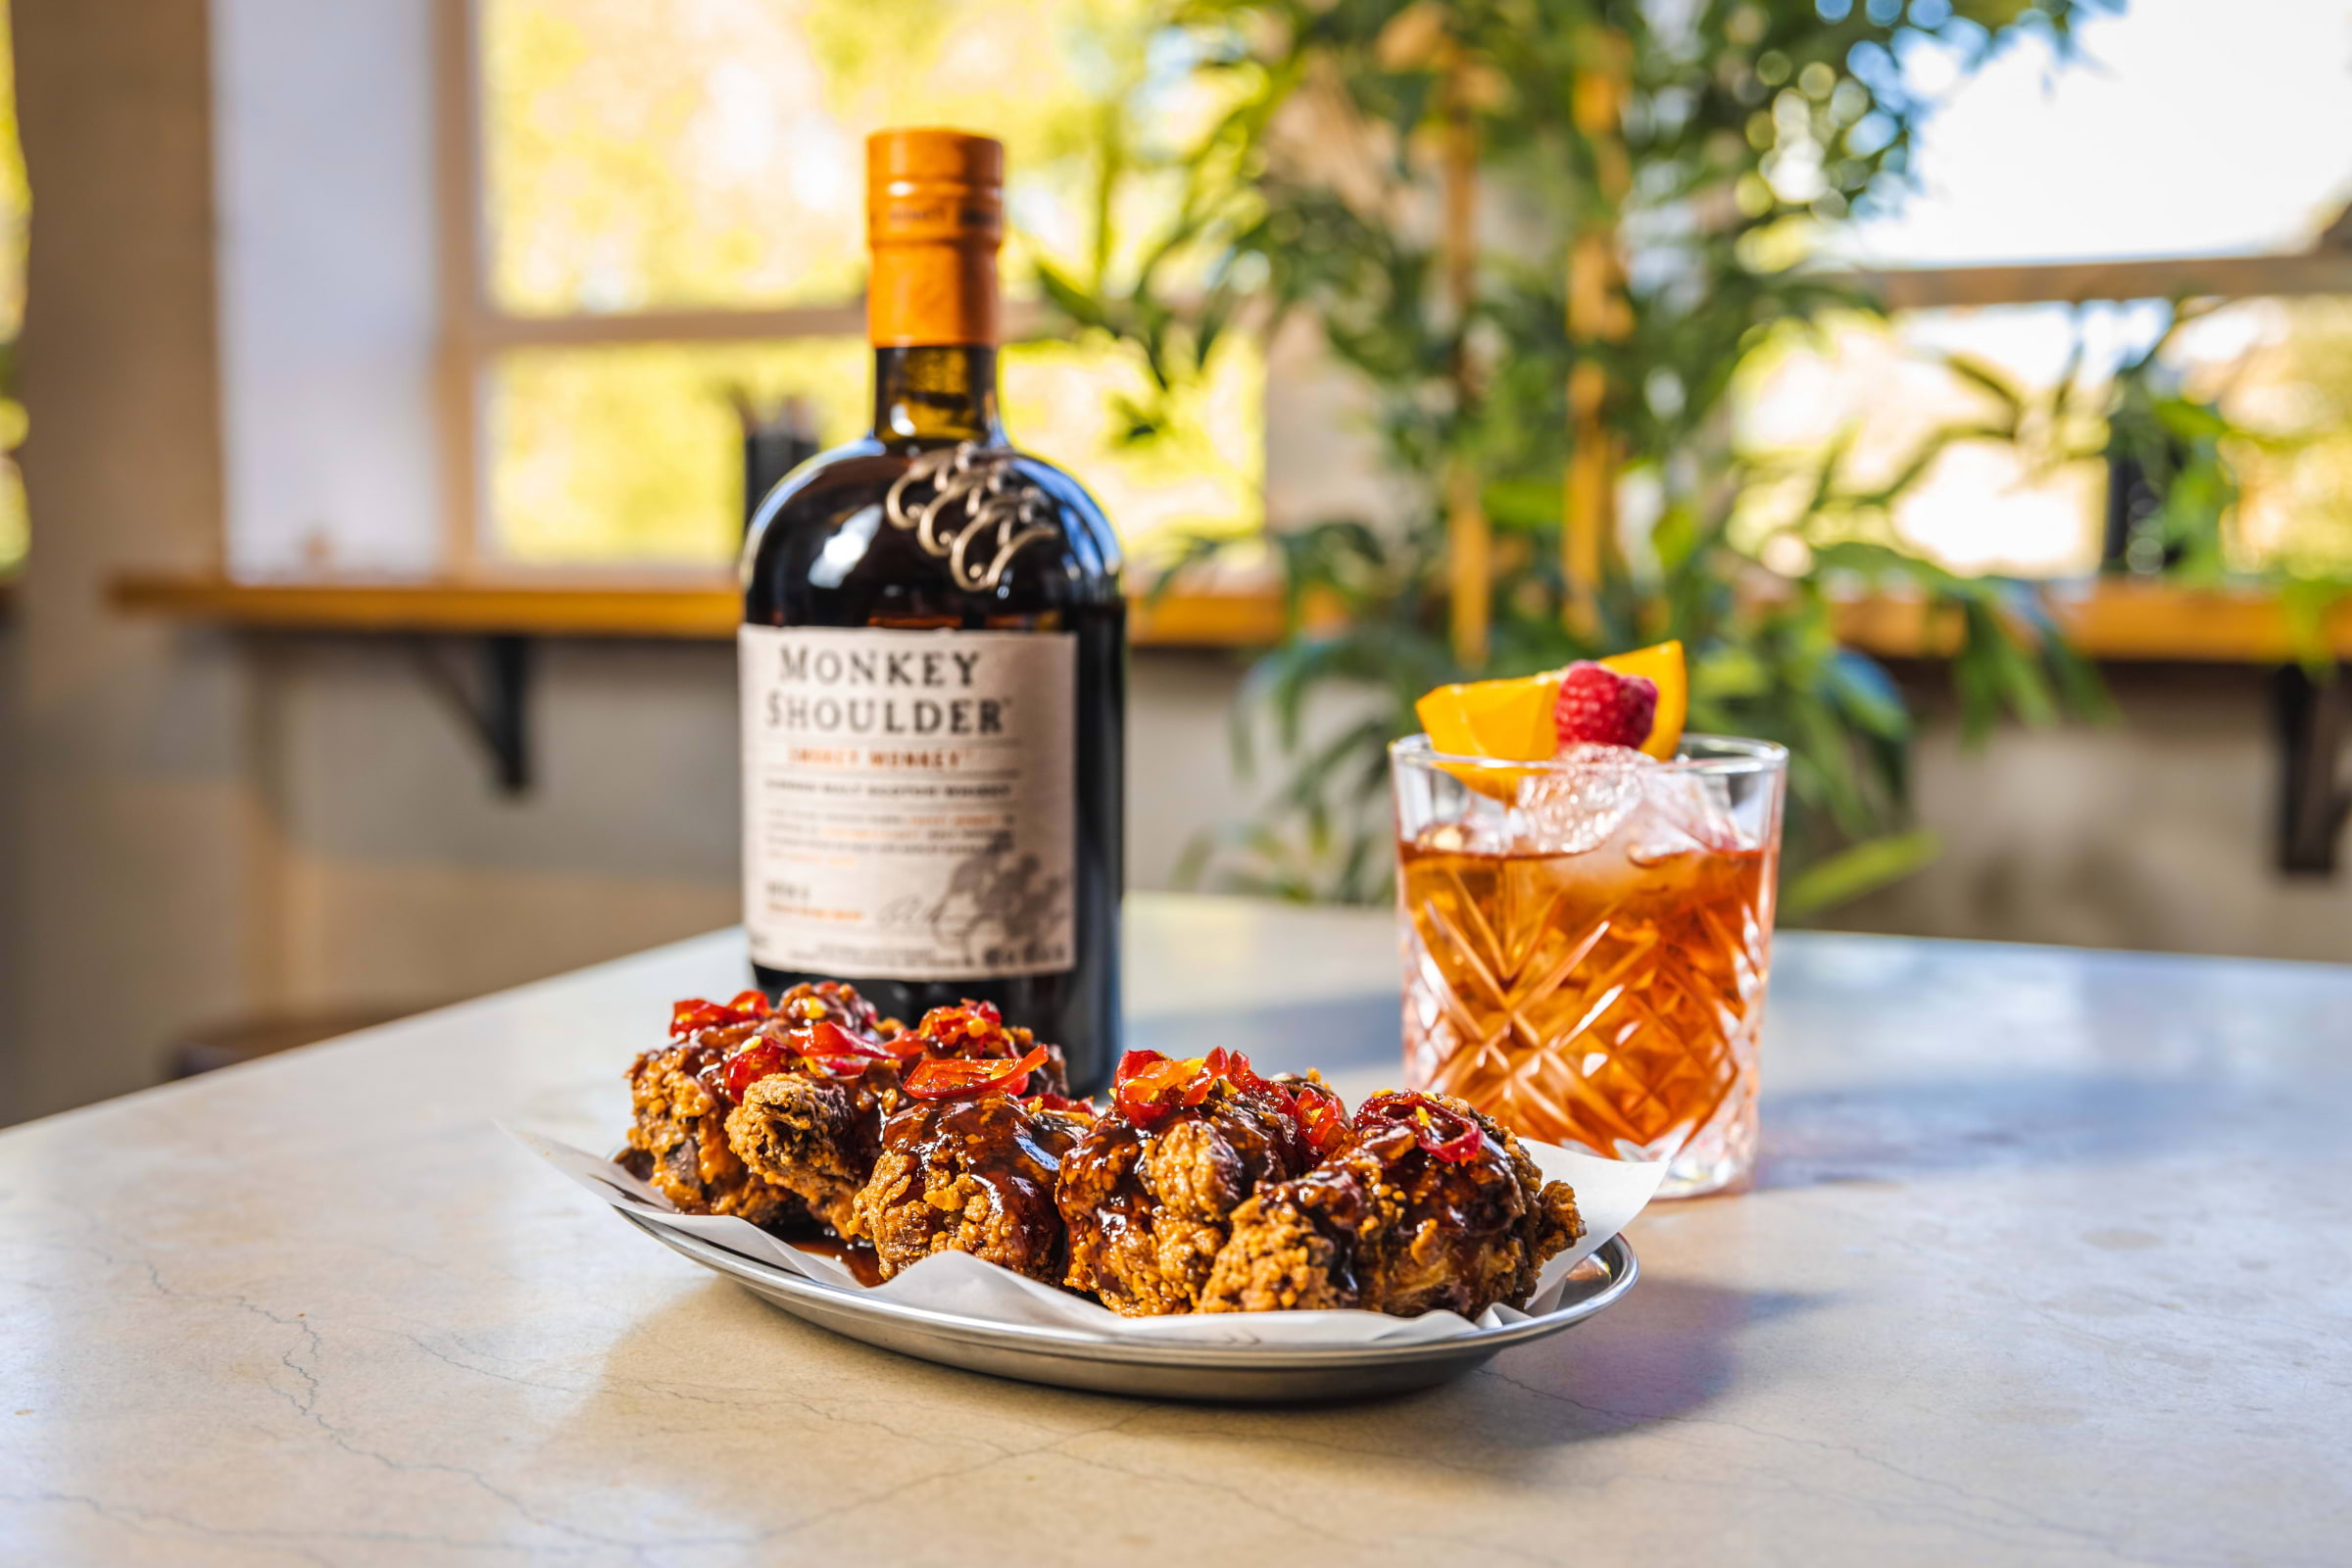 The limited edition fried chicken and whisky collab we've all been waiting for